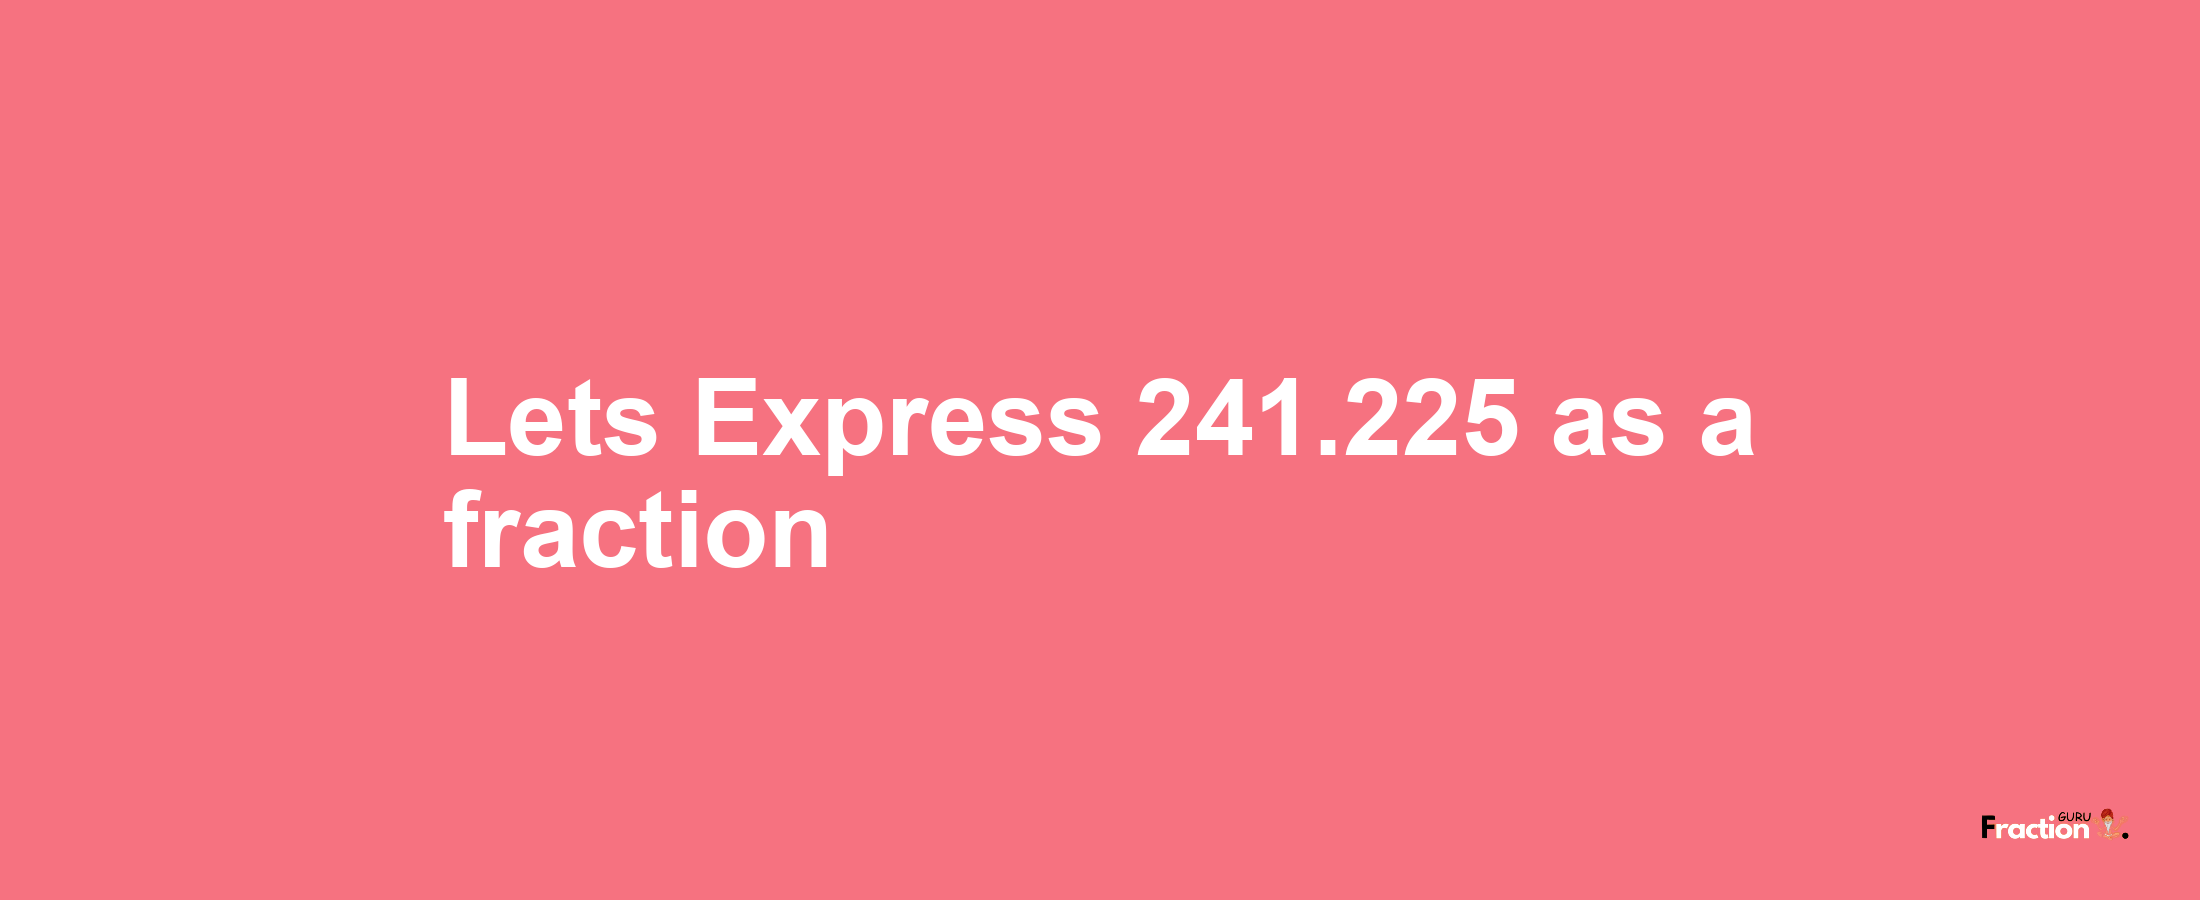 Lets Express 241.225 as afraction